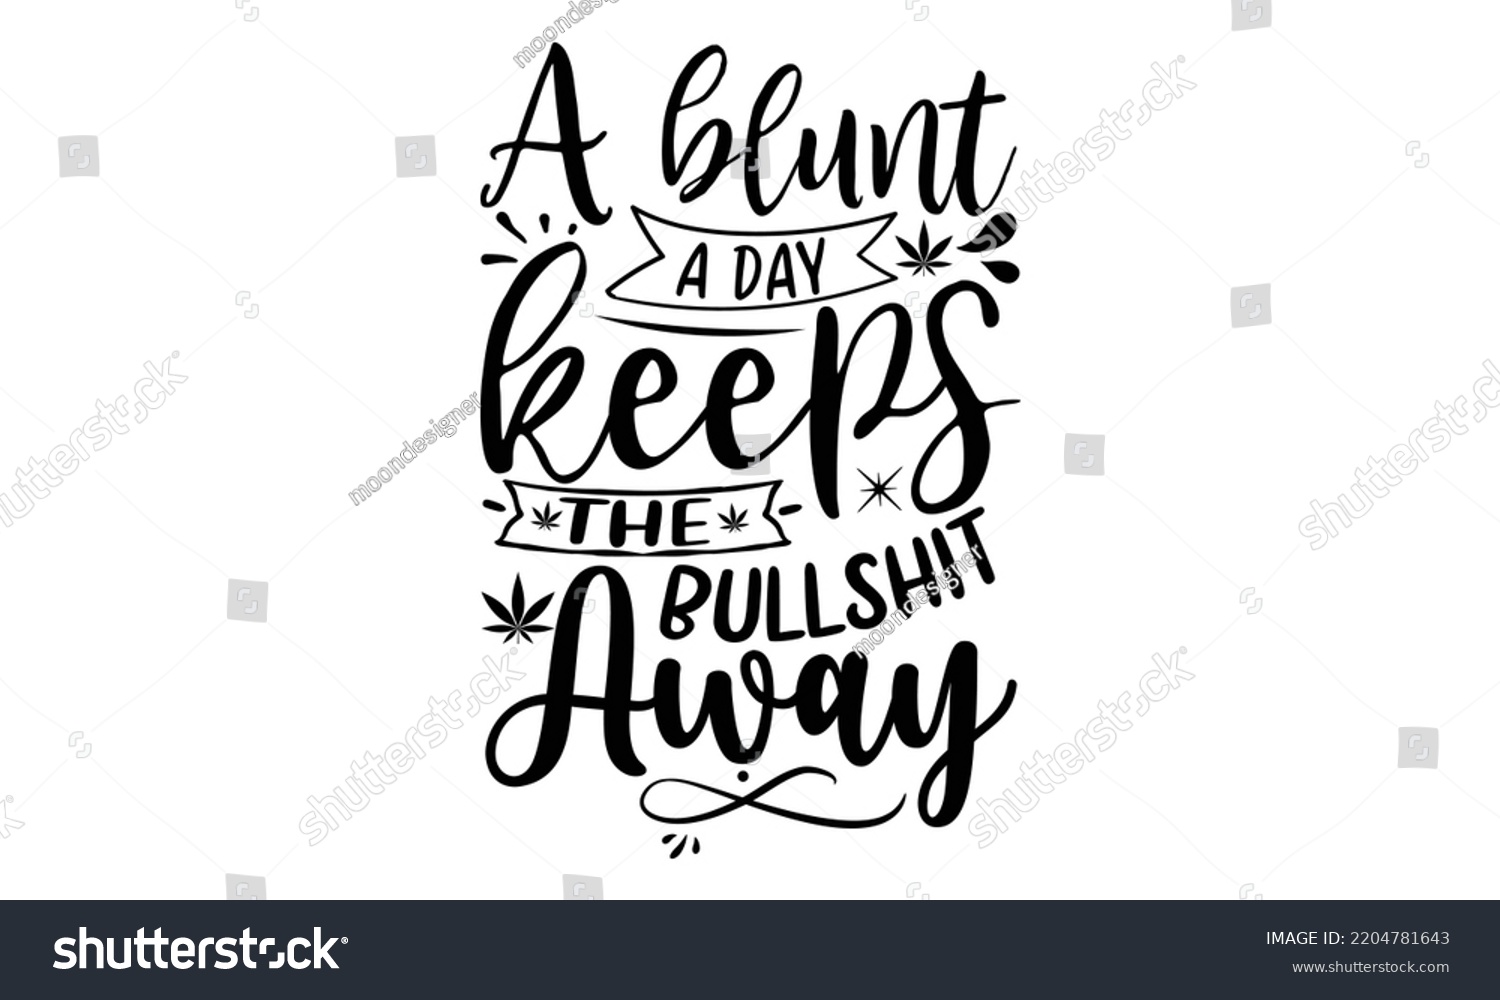 SVG of a blunt a day keeps the bullshit away - Cannabis T-shirt and svg design, merchandise graphics, typography design, svg Files for Cutting and Silhouette, can you download this Design, EPS, 10 svg